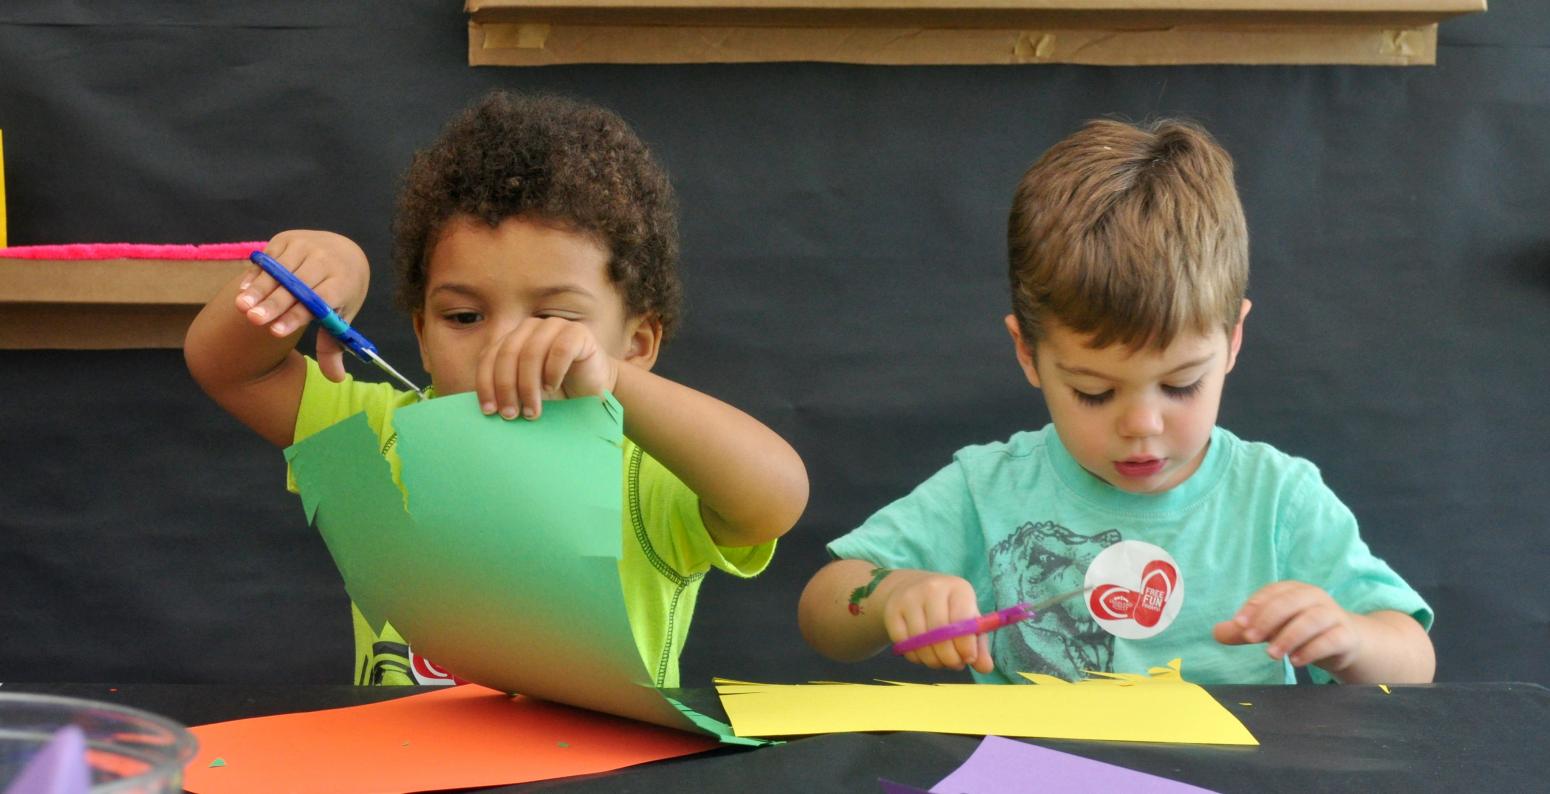 Two young children cutting colorful construction paper at a table.